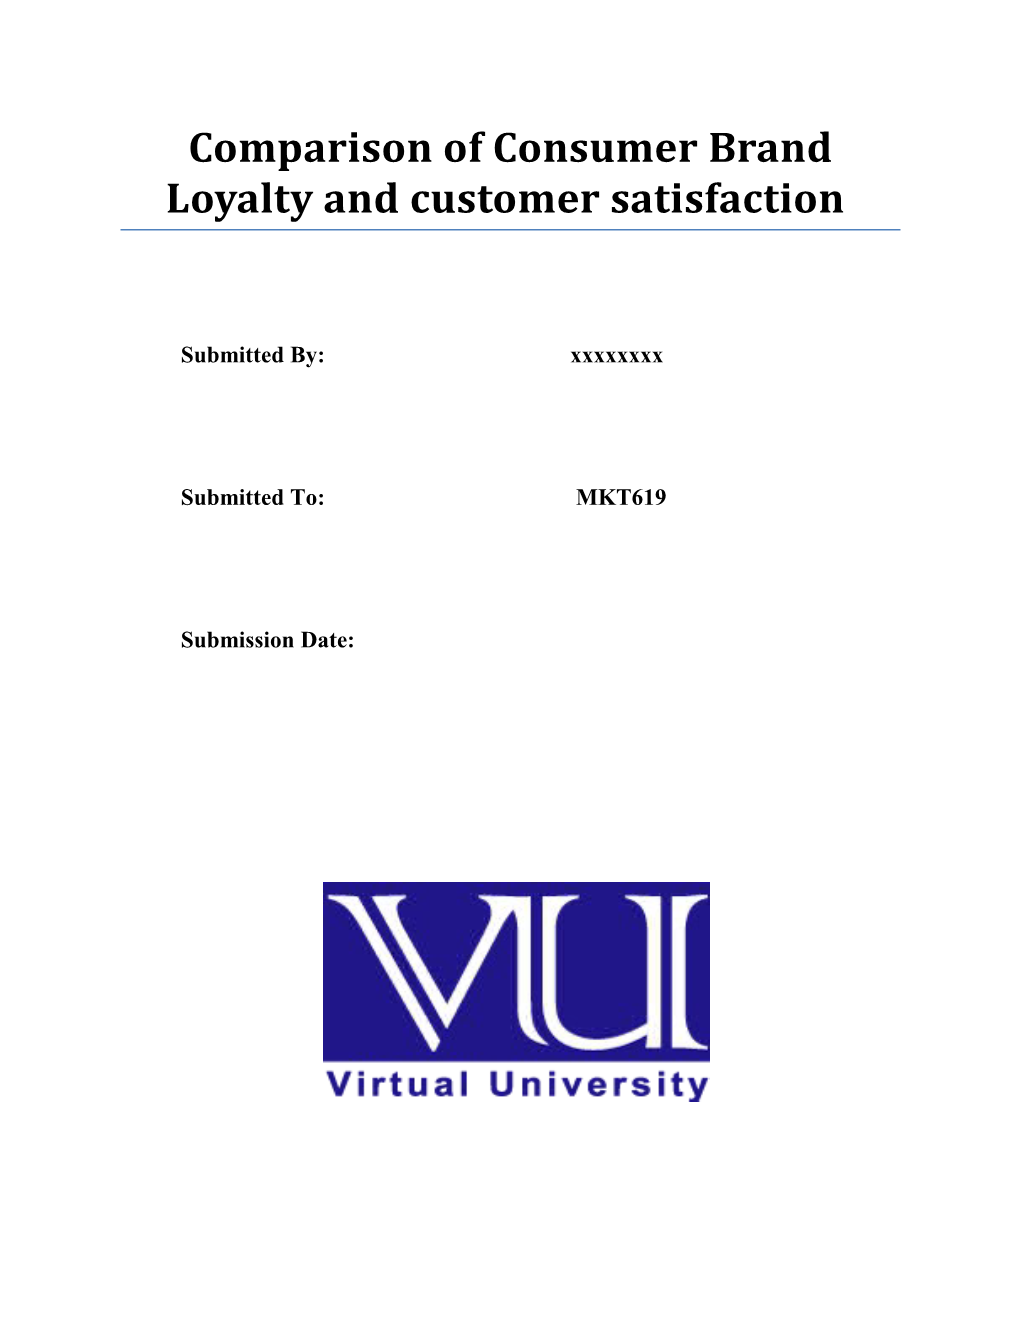 Comparison of Consumer Brand Loyalty and Customer Satisfaction